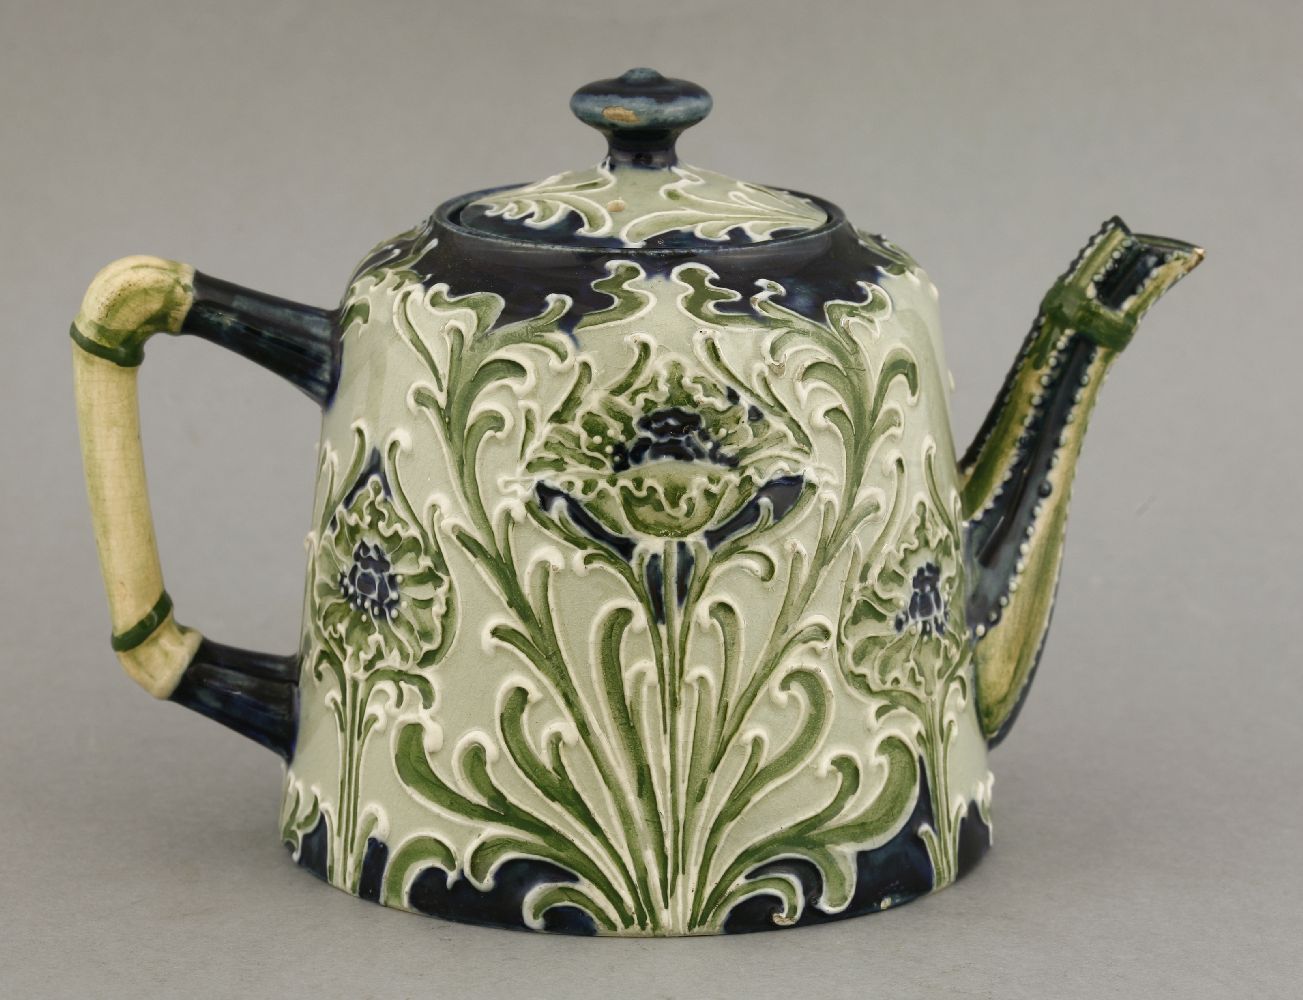 A MacIntryre 'Florianware' teapot,tube lined with flower heads in shades of green, blue and - Image 2 of 3